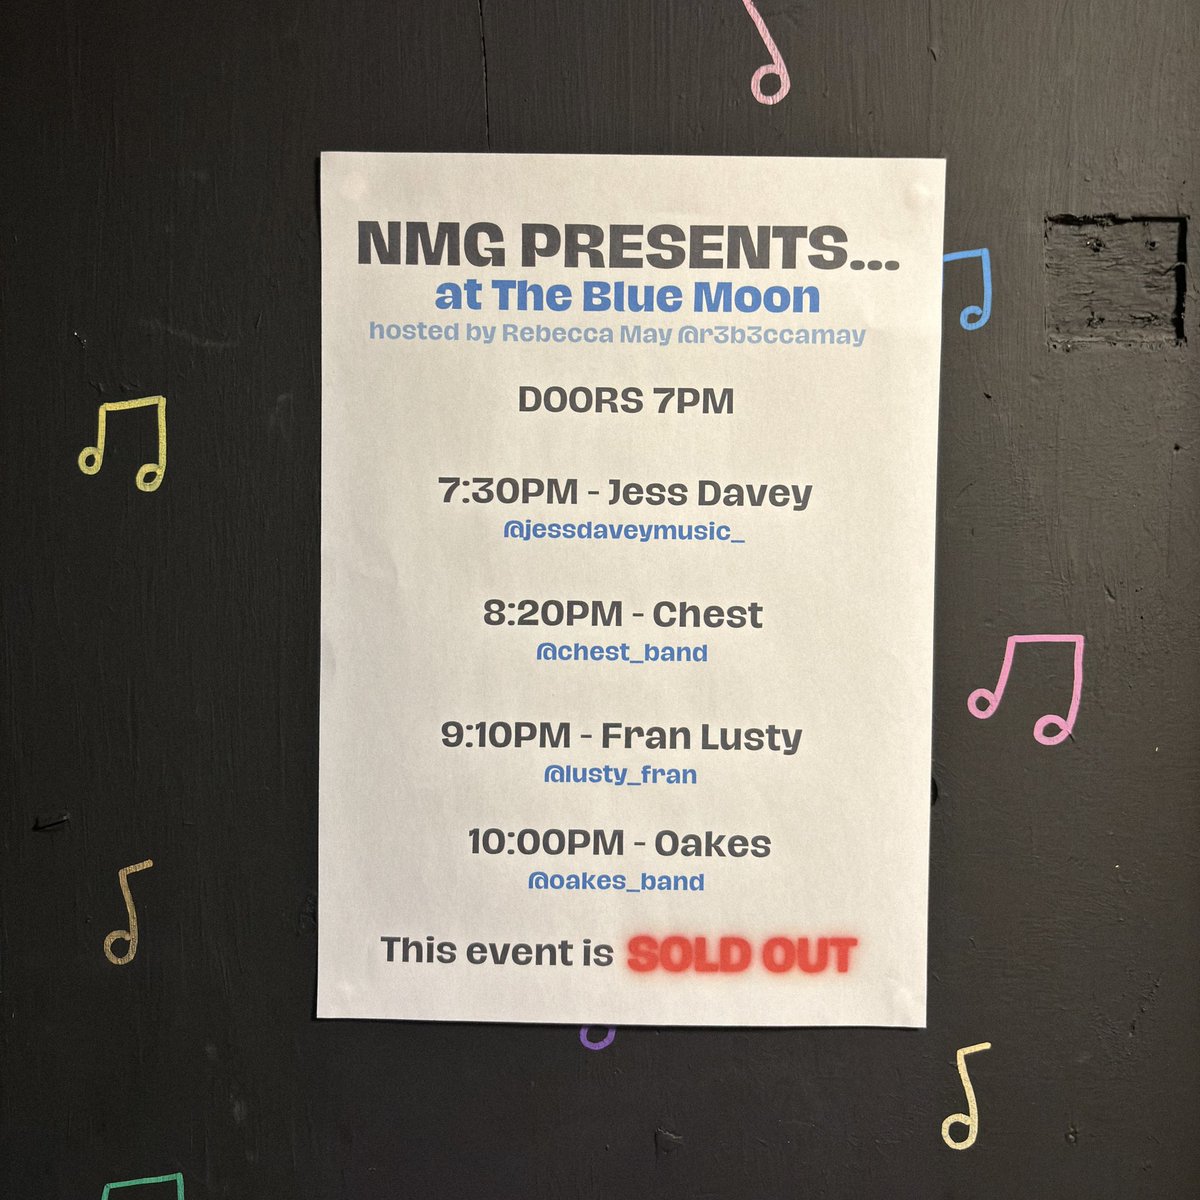 so much fun to be back hosting gigs again! Friday nights show SOLD OUT & it was amazing to see around 100 people attend an event supporting !!! local, new and emerging musicians !!! 🤘🌟🚀